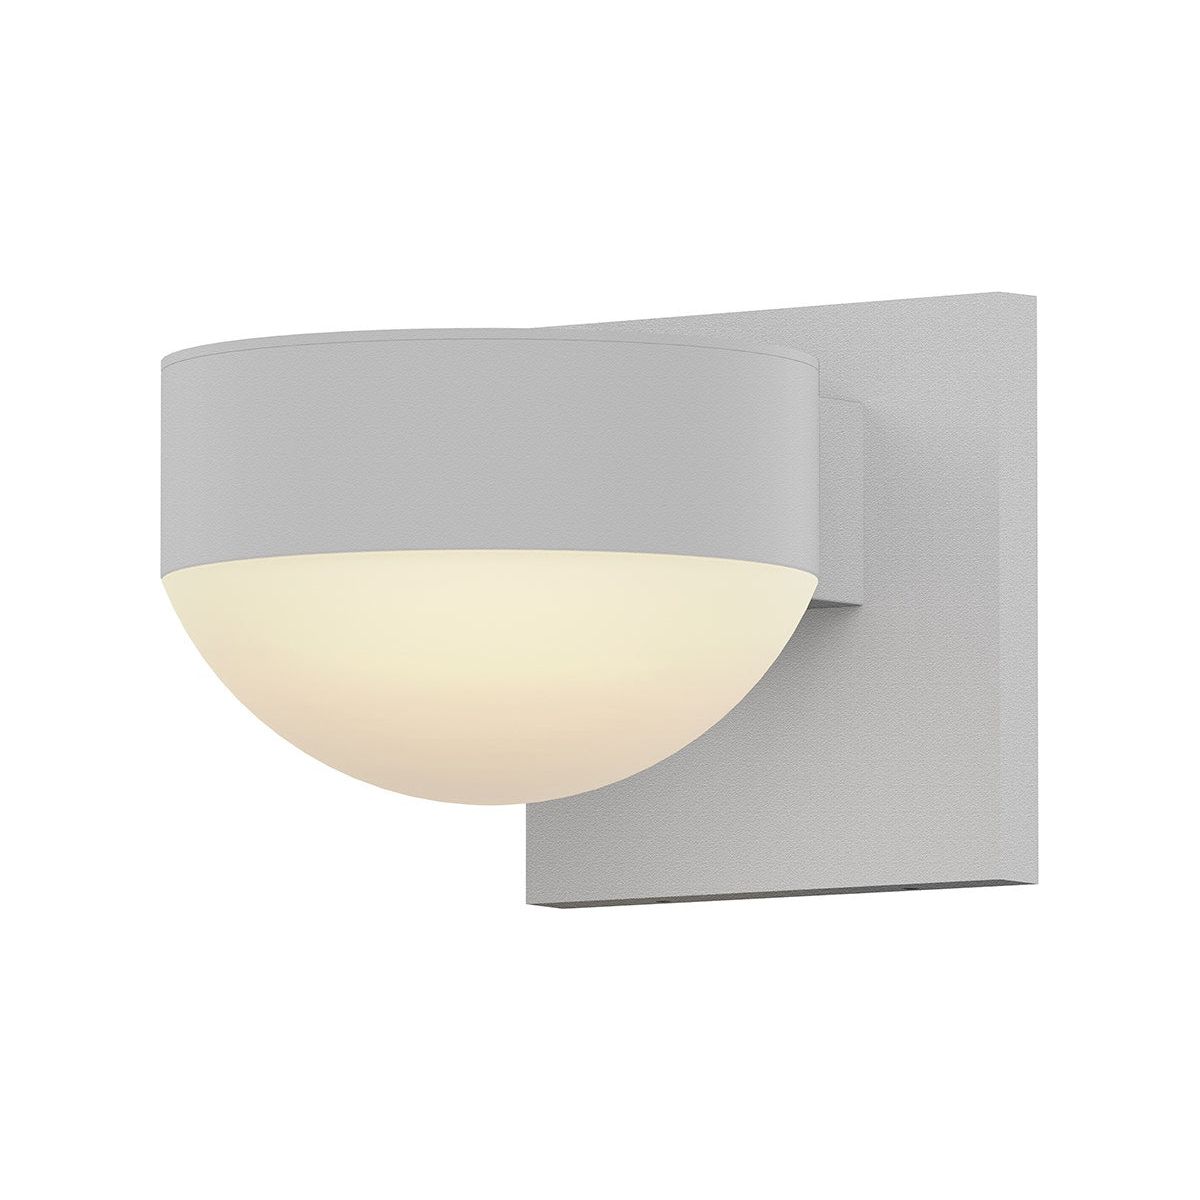 REALS Downlight LED Sconce with Plate Cap and Dome Lens